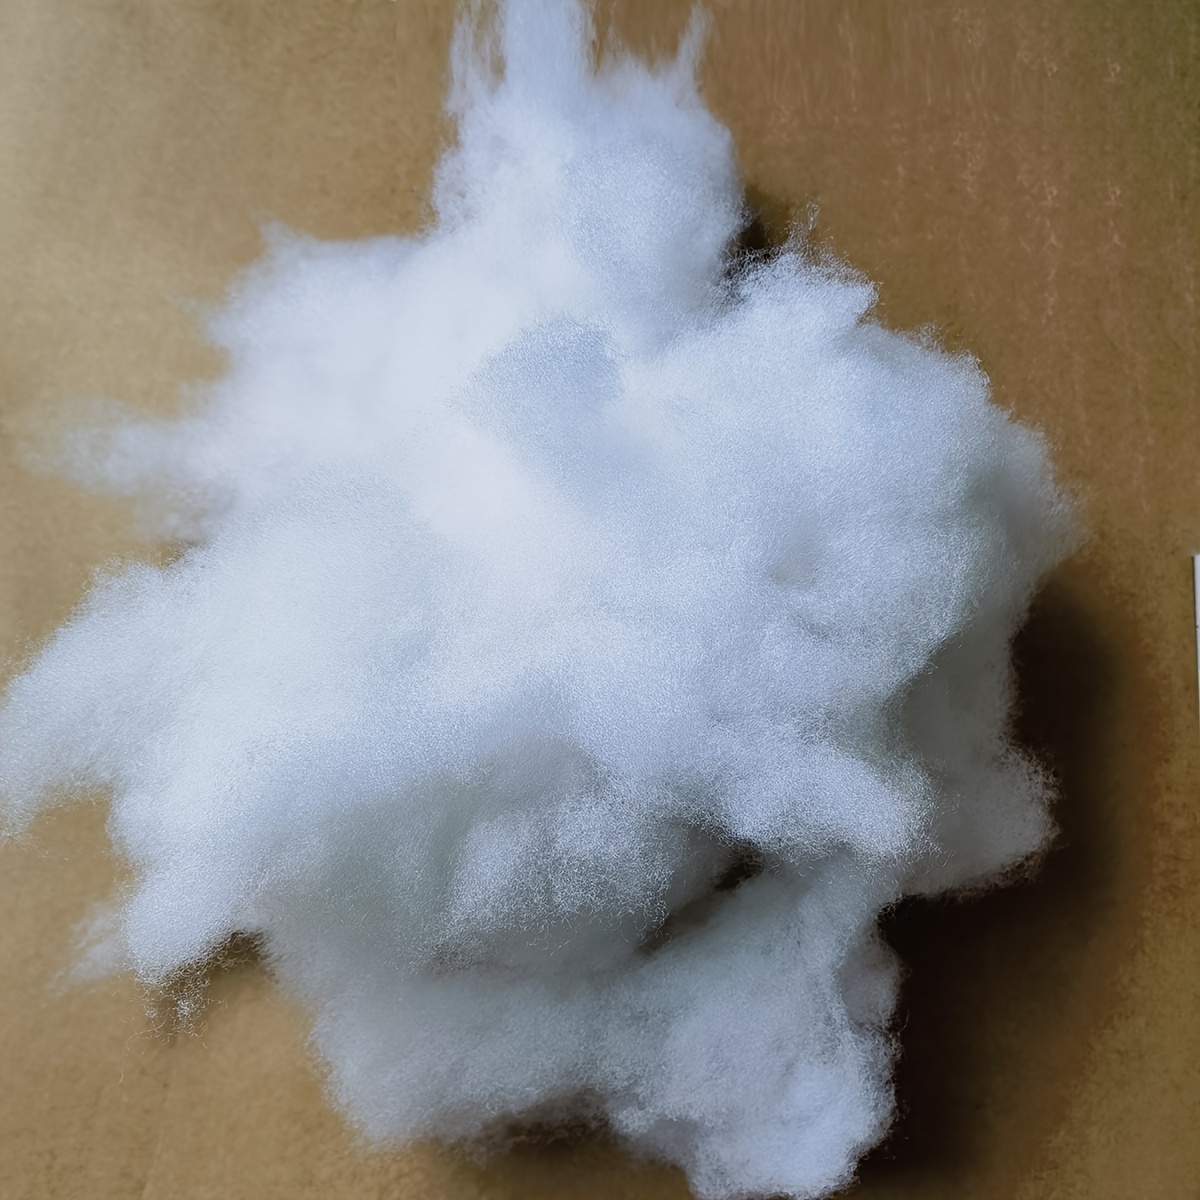 

350g High-elasticity 100% Polyester Fiber Fill Stuffing For Diy Crafts, Plush Toys, Pillows, Cushions, Clothing - Premium White Polyester Filling Material